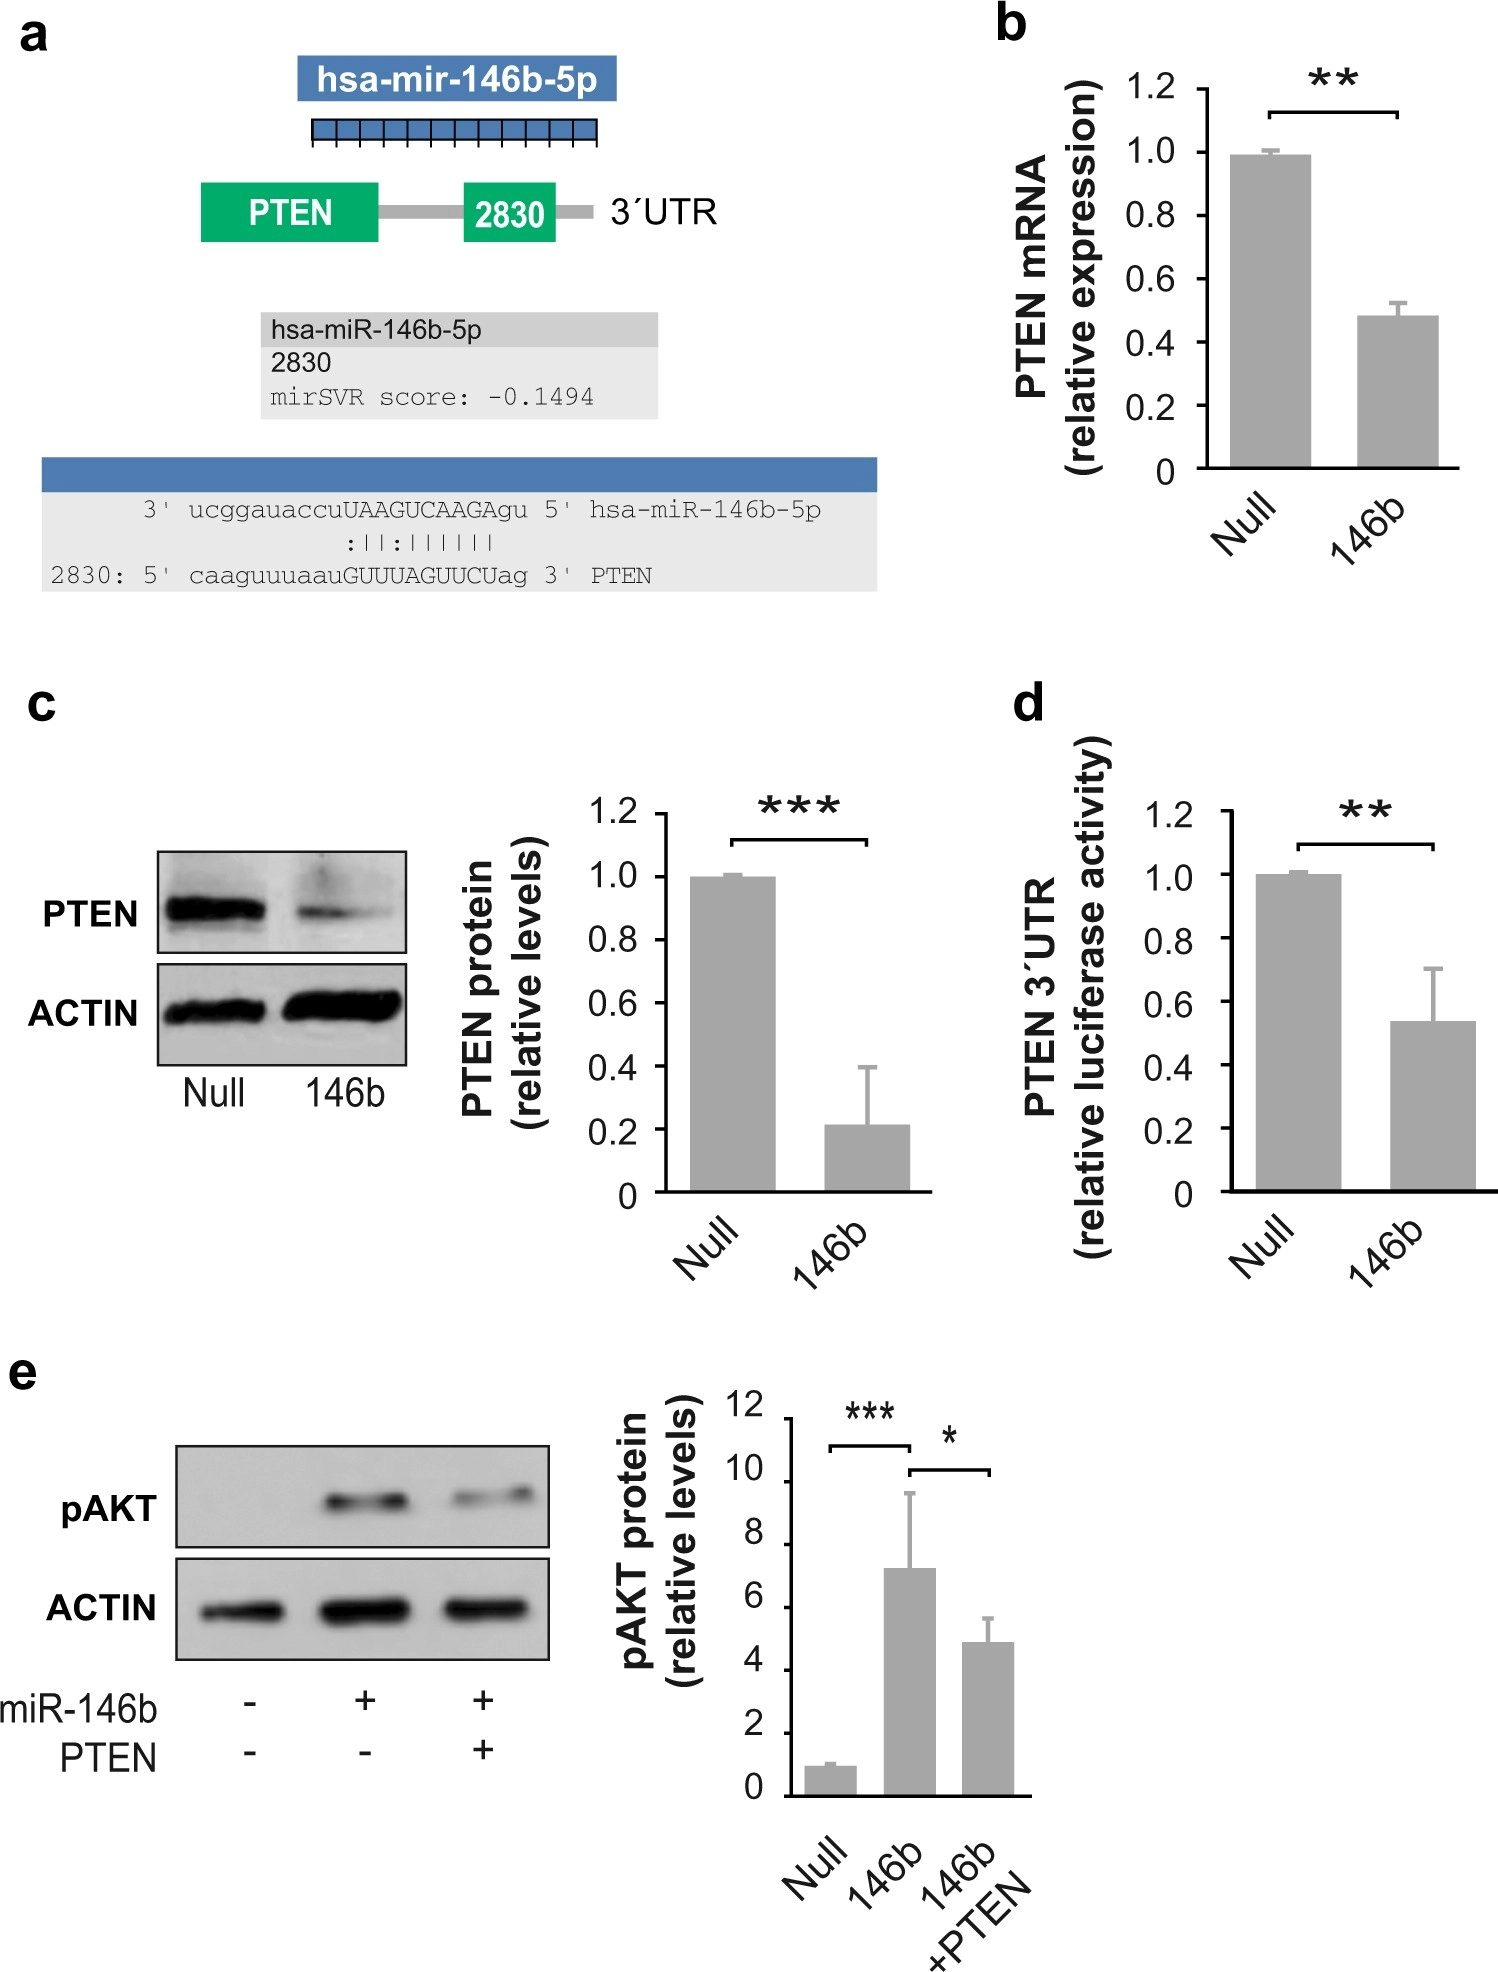 MicroRNA-146b promotes PI3K/AKT pathway hyperactivation and thyroid cancer progression by targeting PTEN